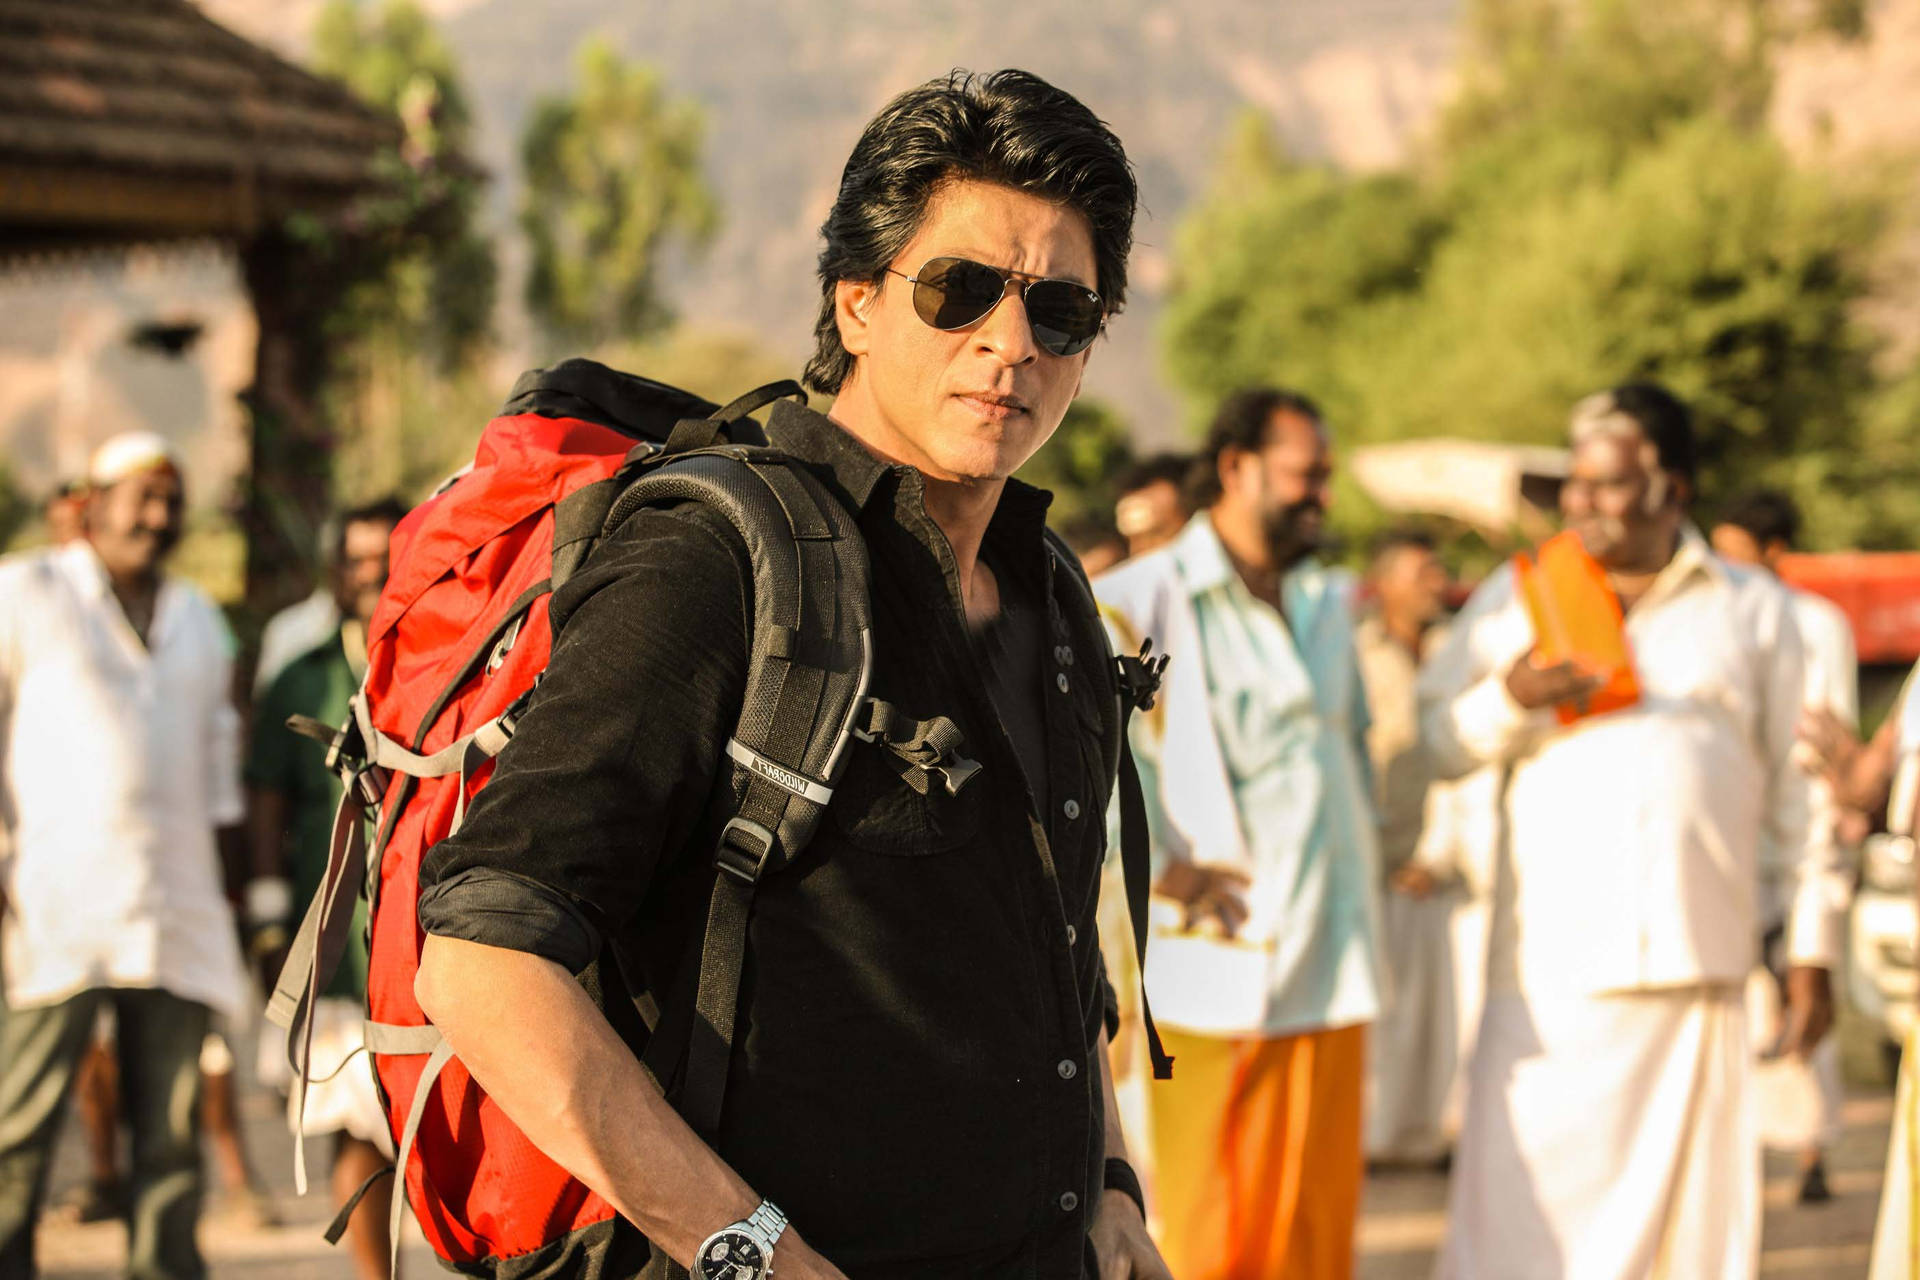 LONG READ | World Bank economist and author of Desperately Seeking Shah  Rukh: India's Lonely Young Women and the Search for Intimacy and  Independence, Shrayana Bhattacharya, decodes the charm of SRK -